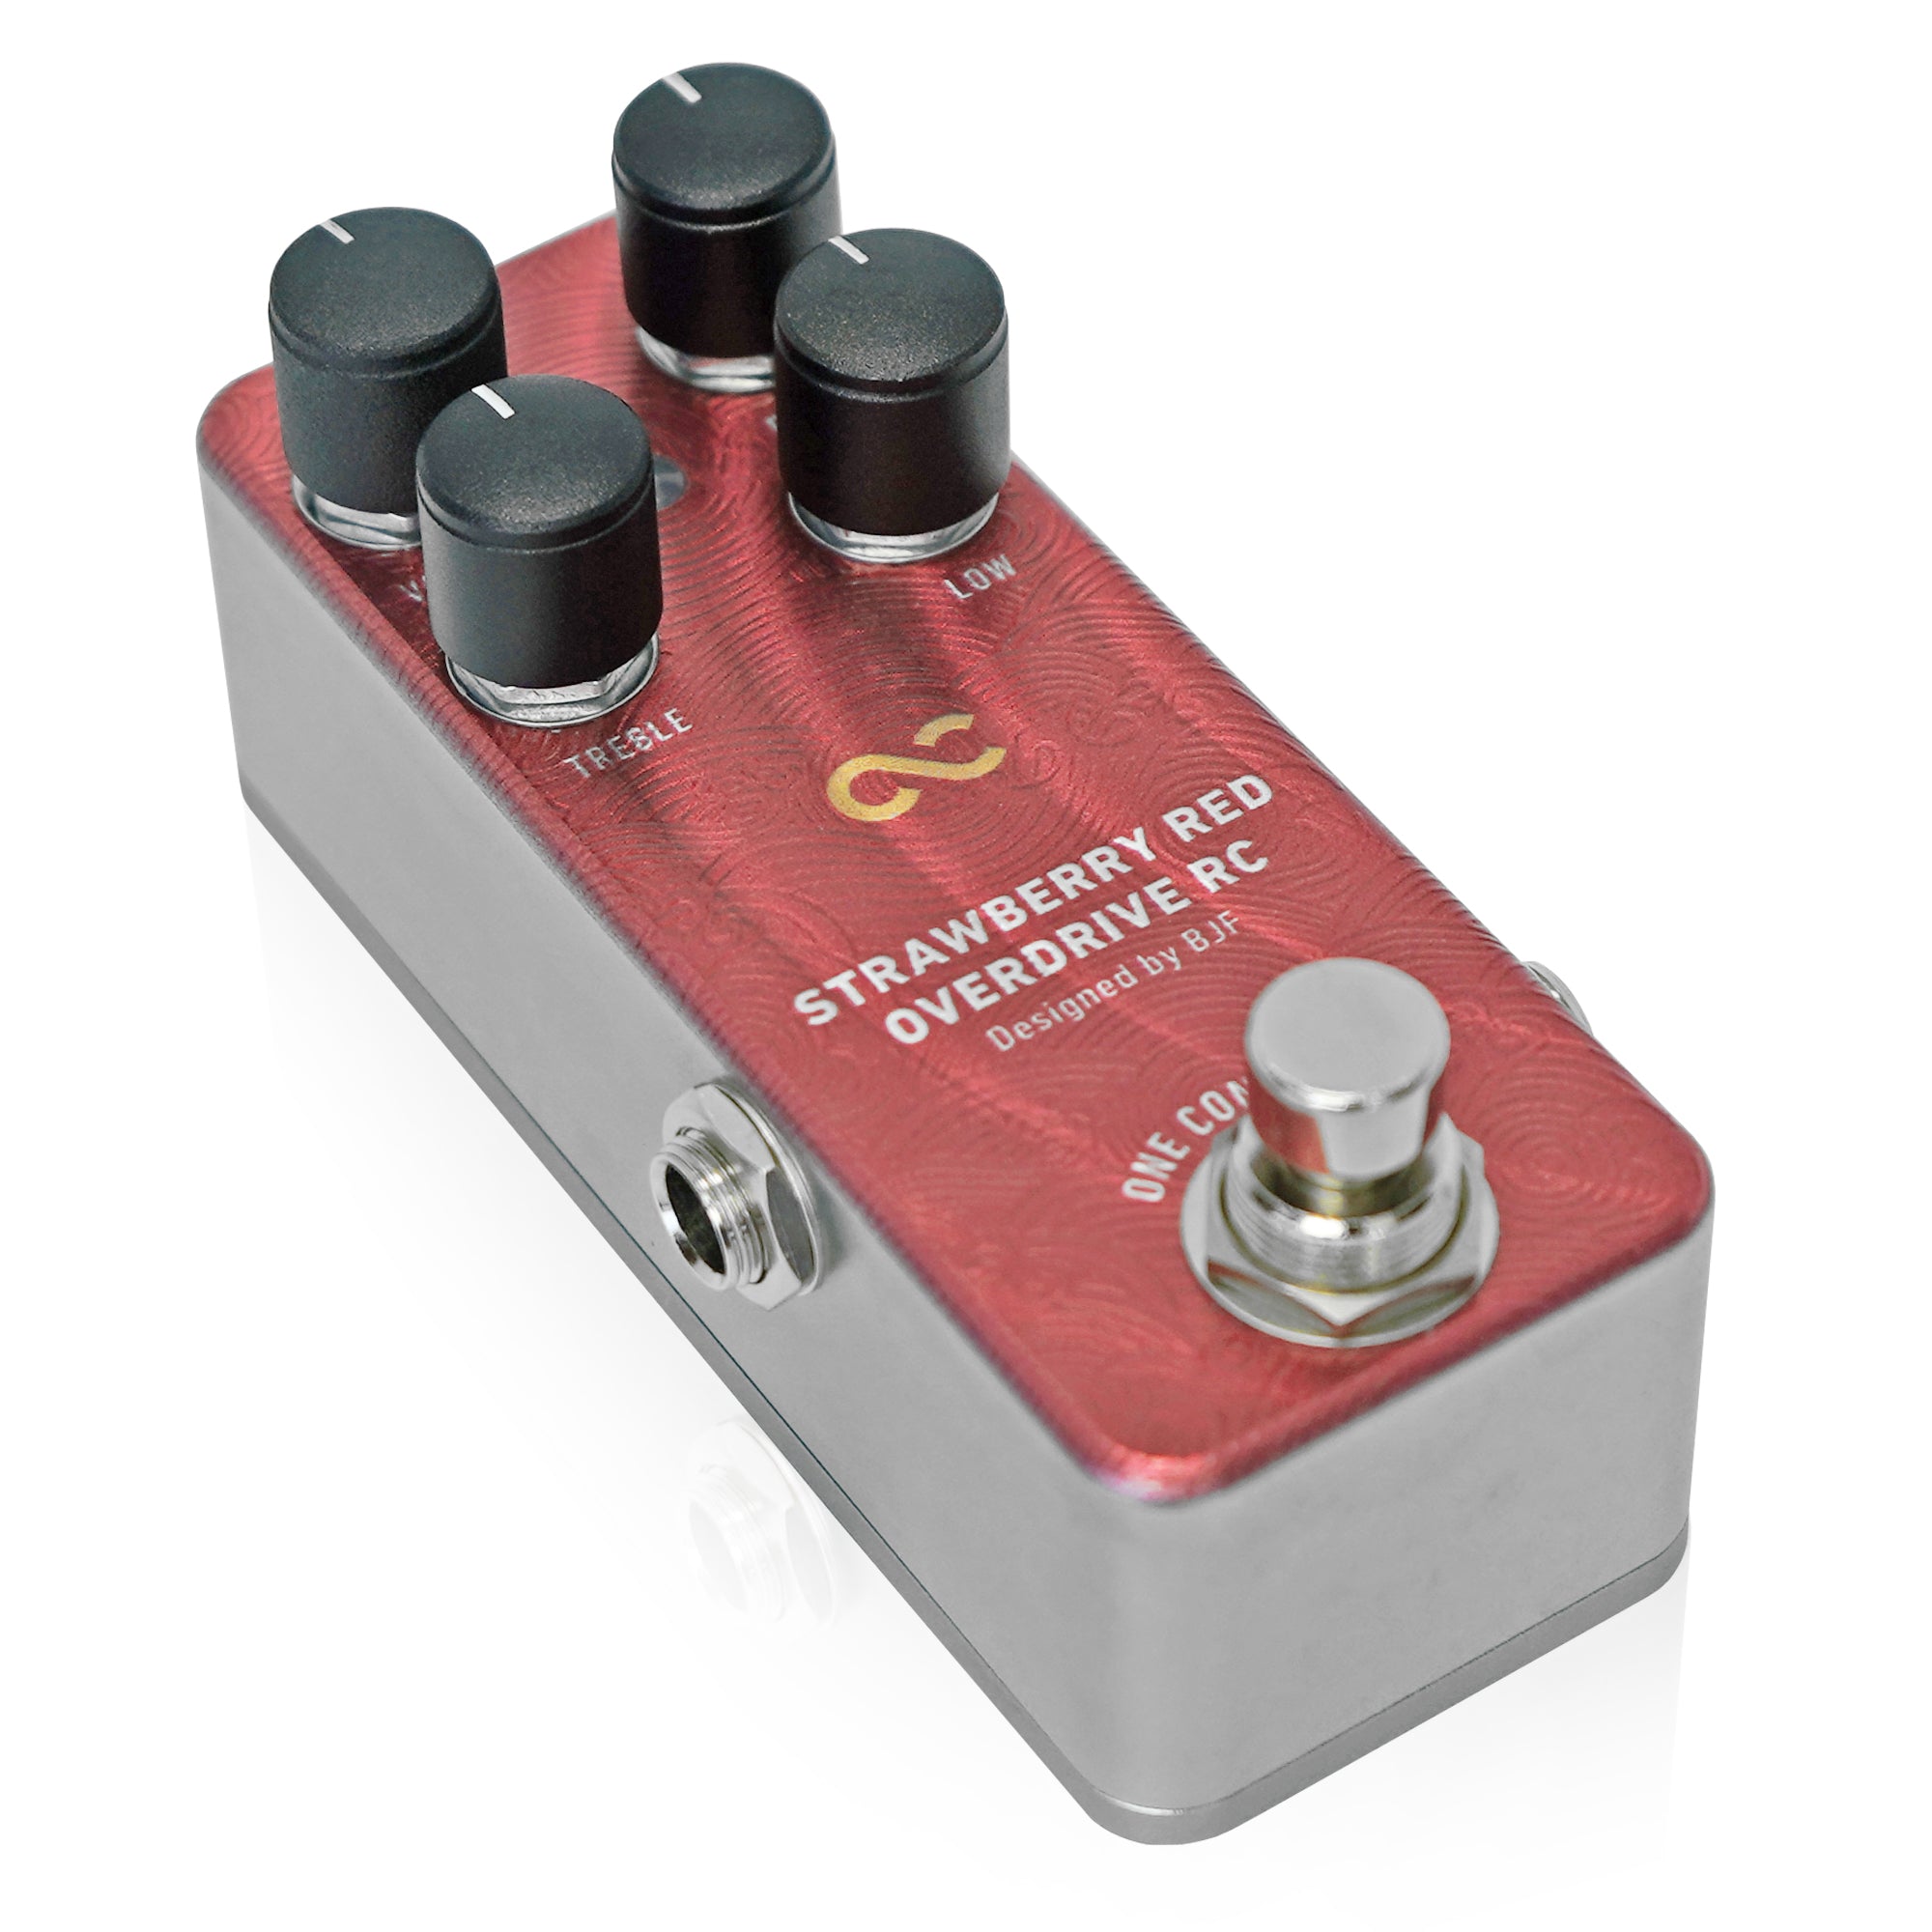 One Control STRAWBERRY RED OVERDRIVE RC – OneControl